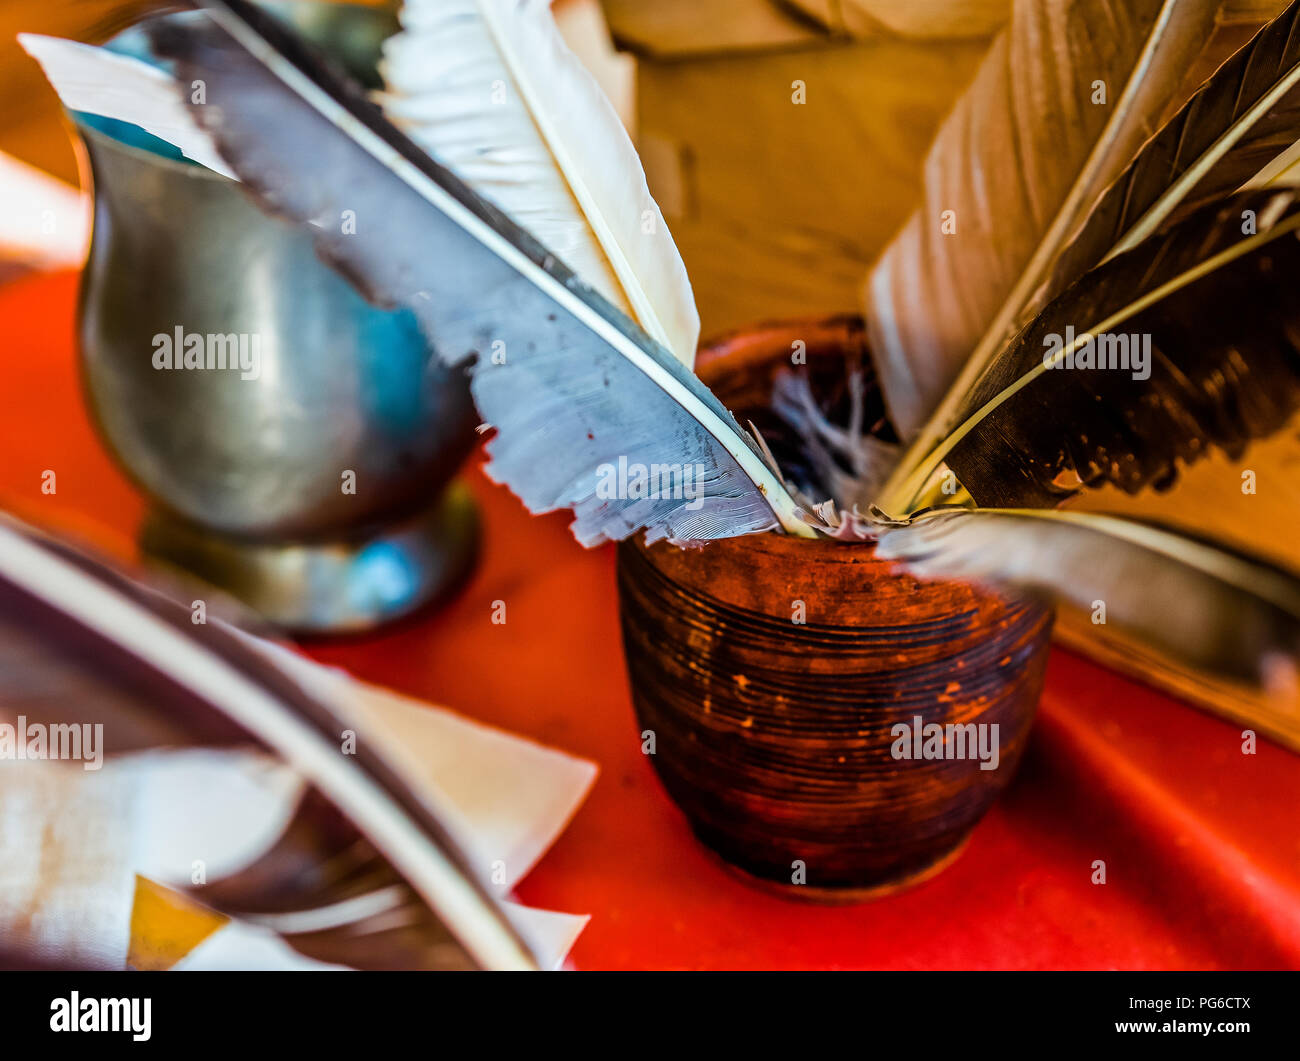 Ceramic bowl full of ancient quills stands on a table covered with a red tablecloth. Metal bowl in the background. Back to school, white a message the Stock Photo